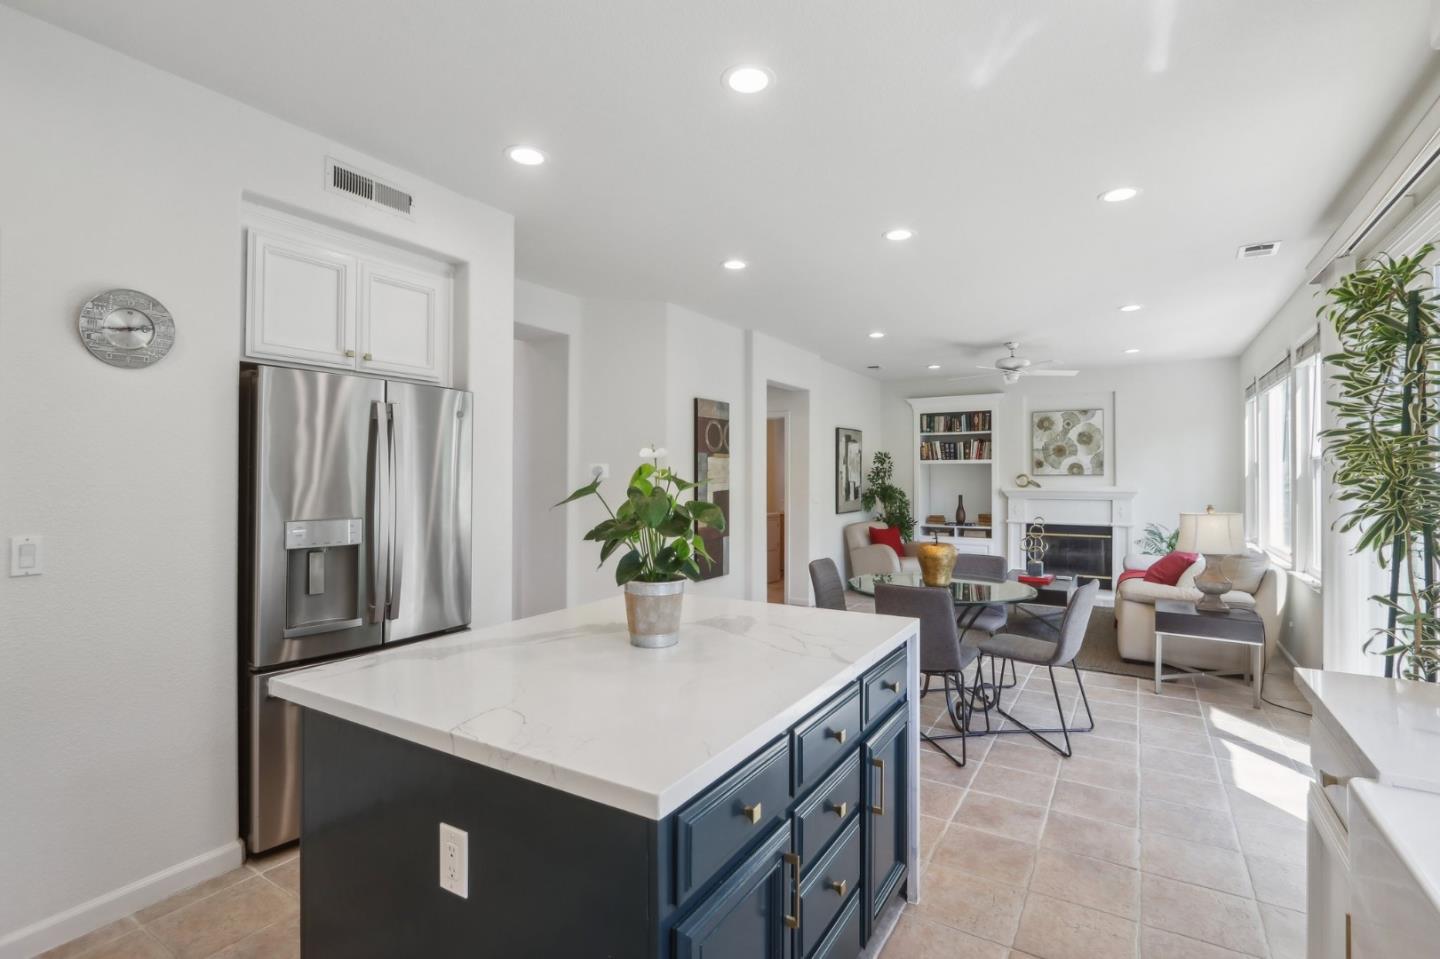 a living room with stainless steel appliances kitchen island furniture and a refrigerator